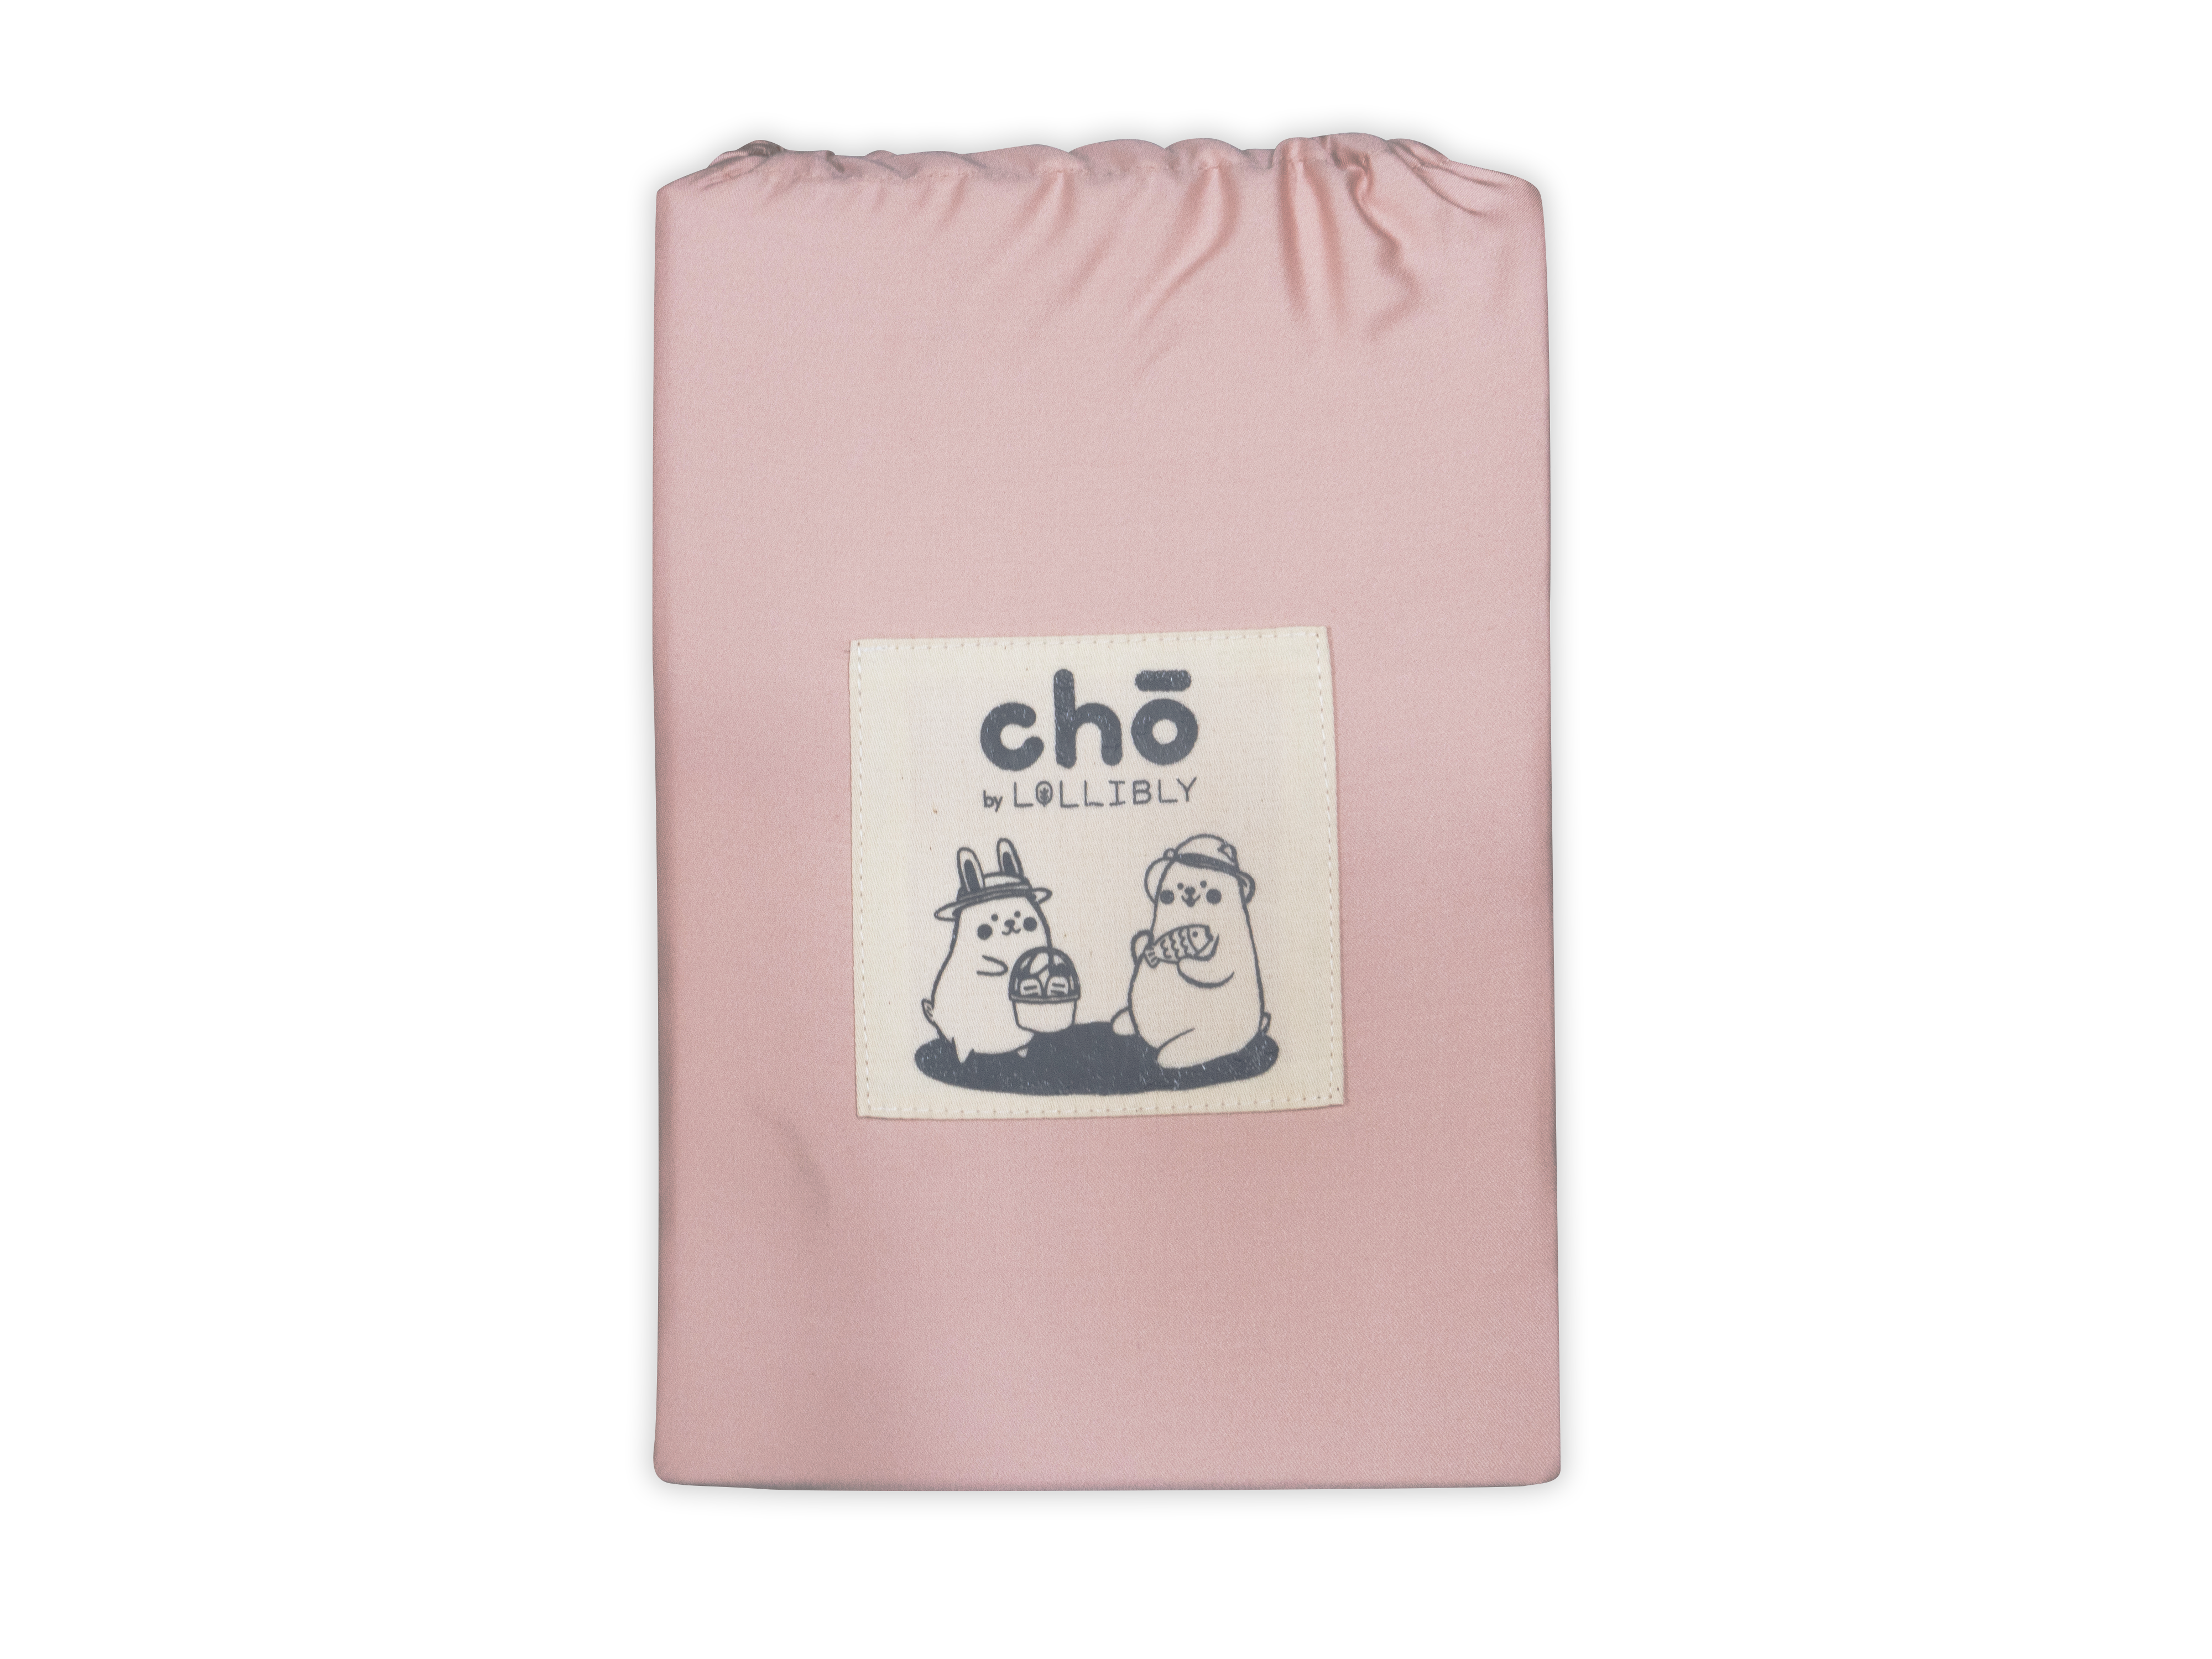 Blush cho crib and cot sheet in packaging